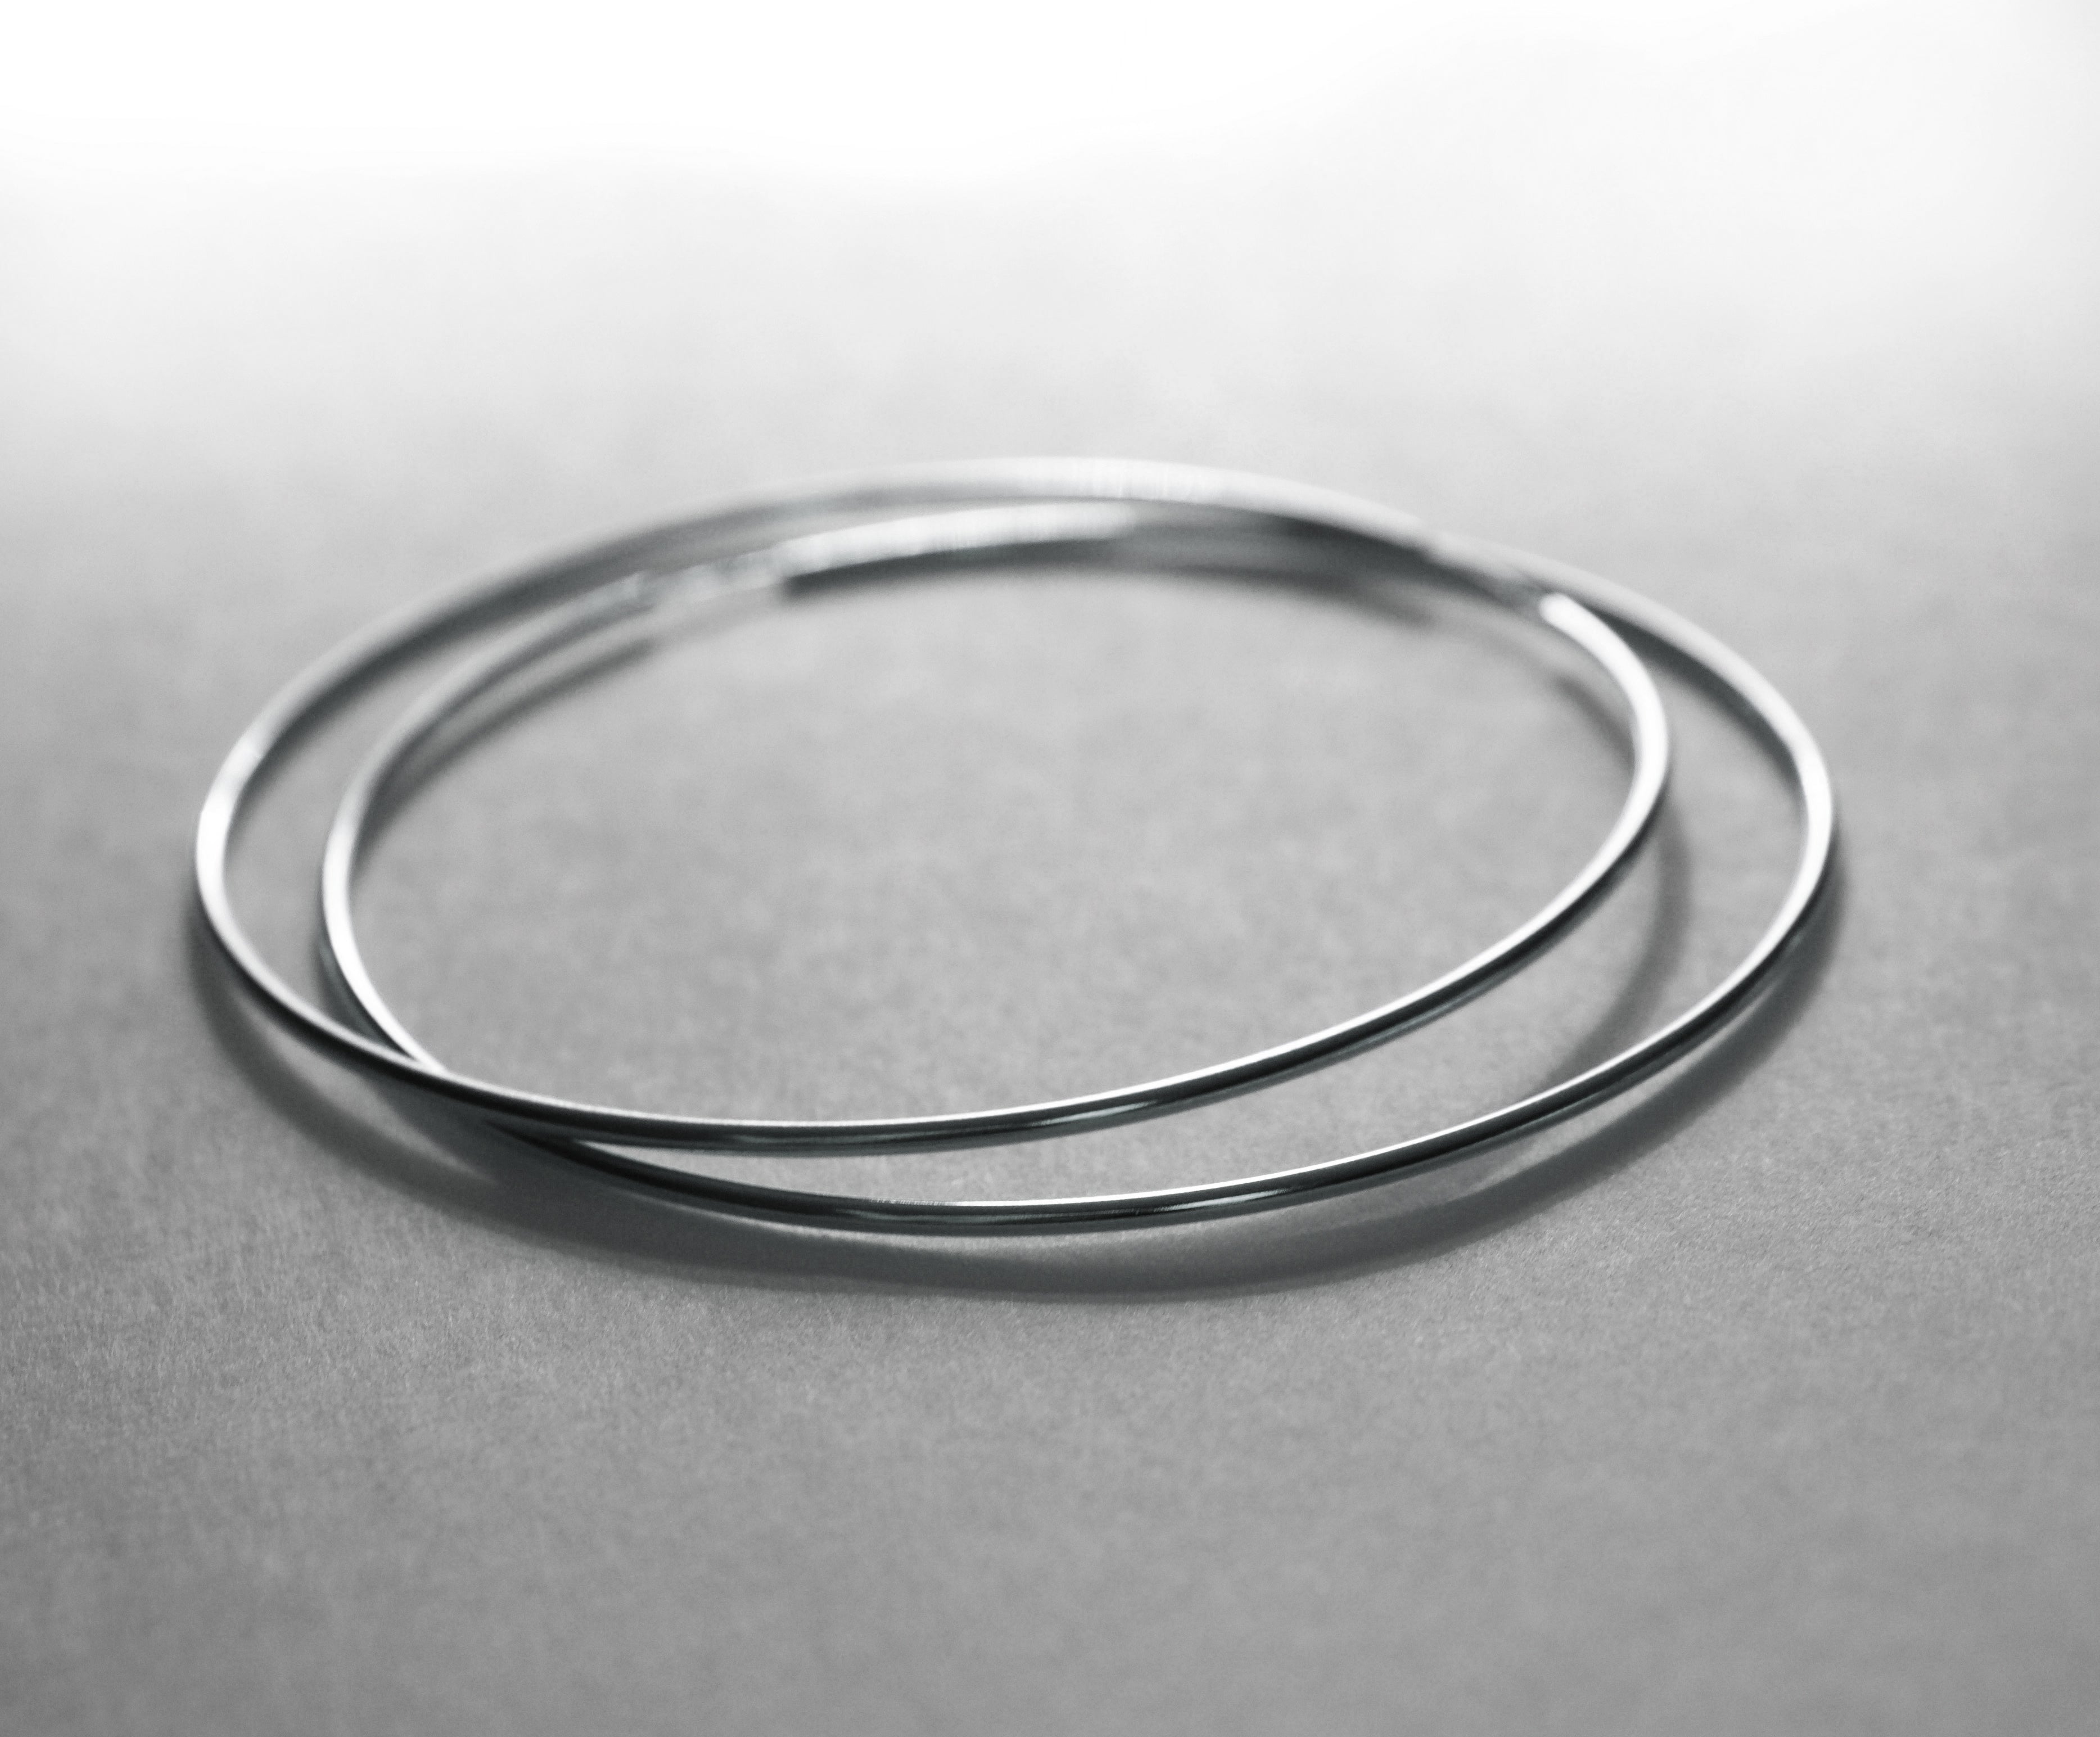 ESSENTIAL style - Fabulous 70mm 10K White Gold Hoops